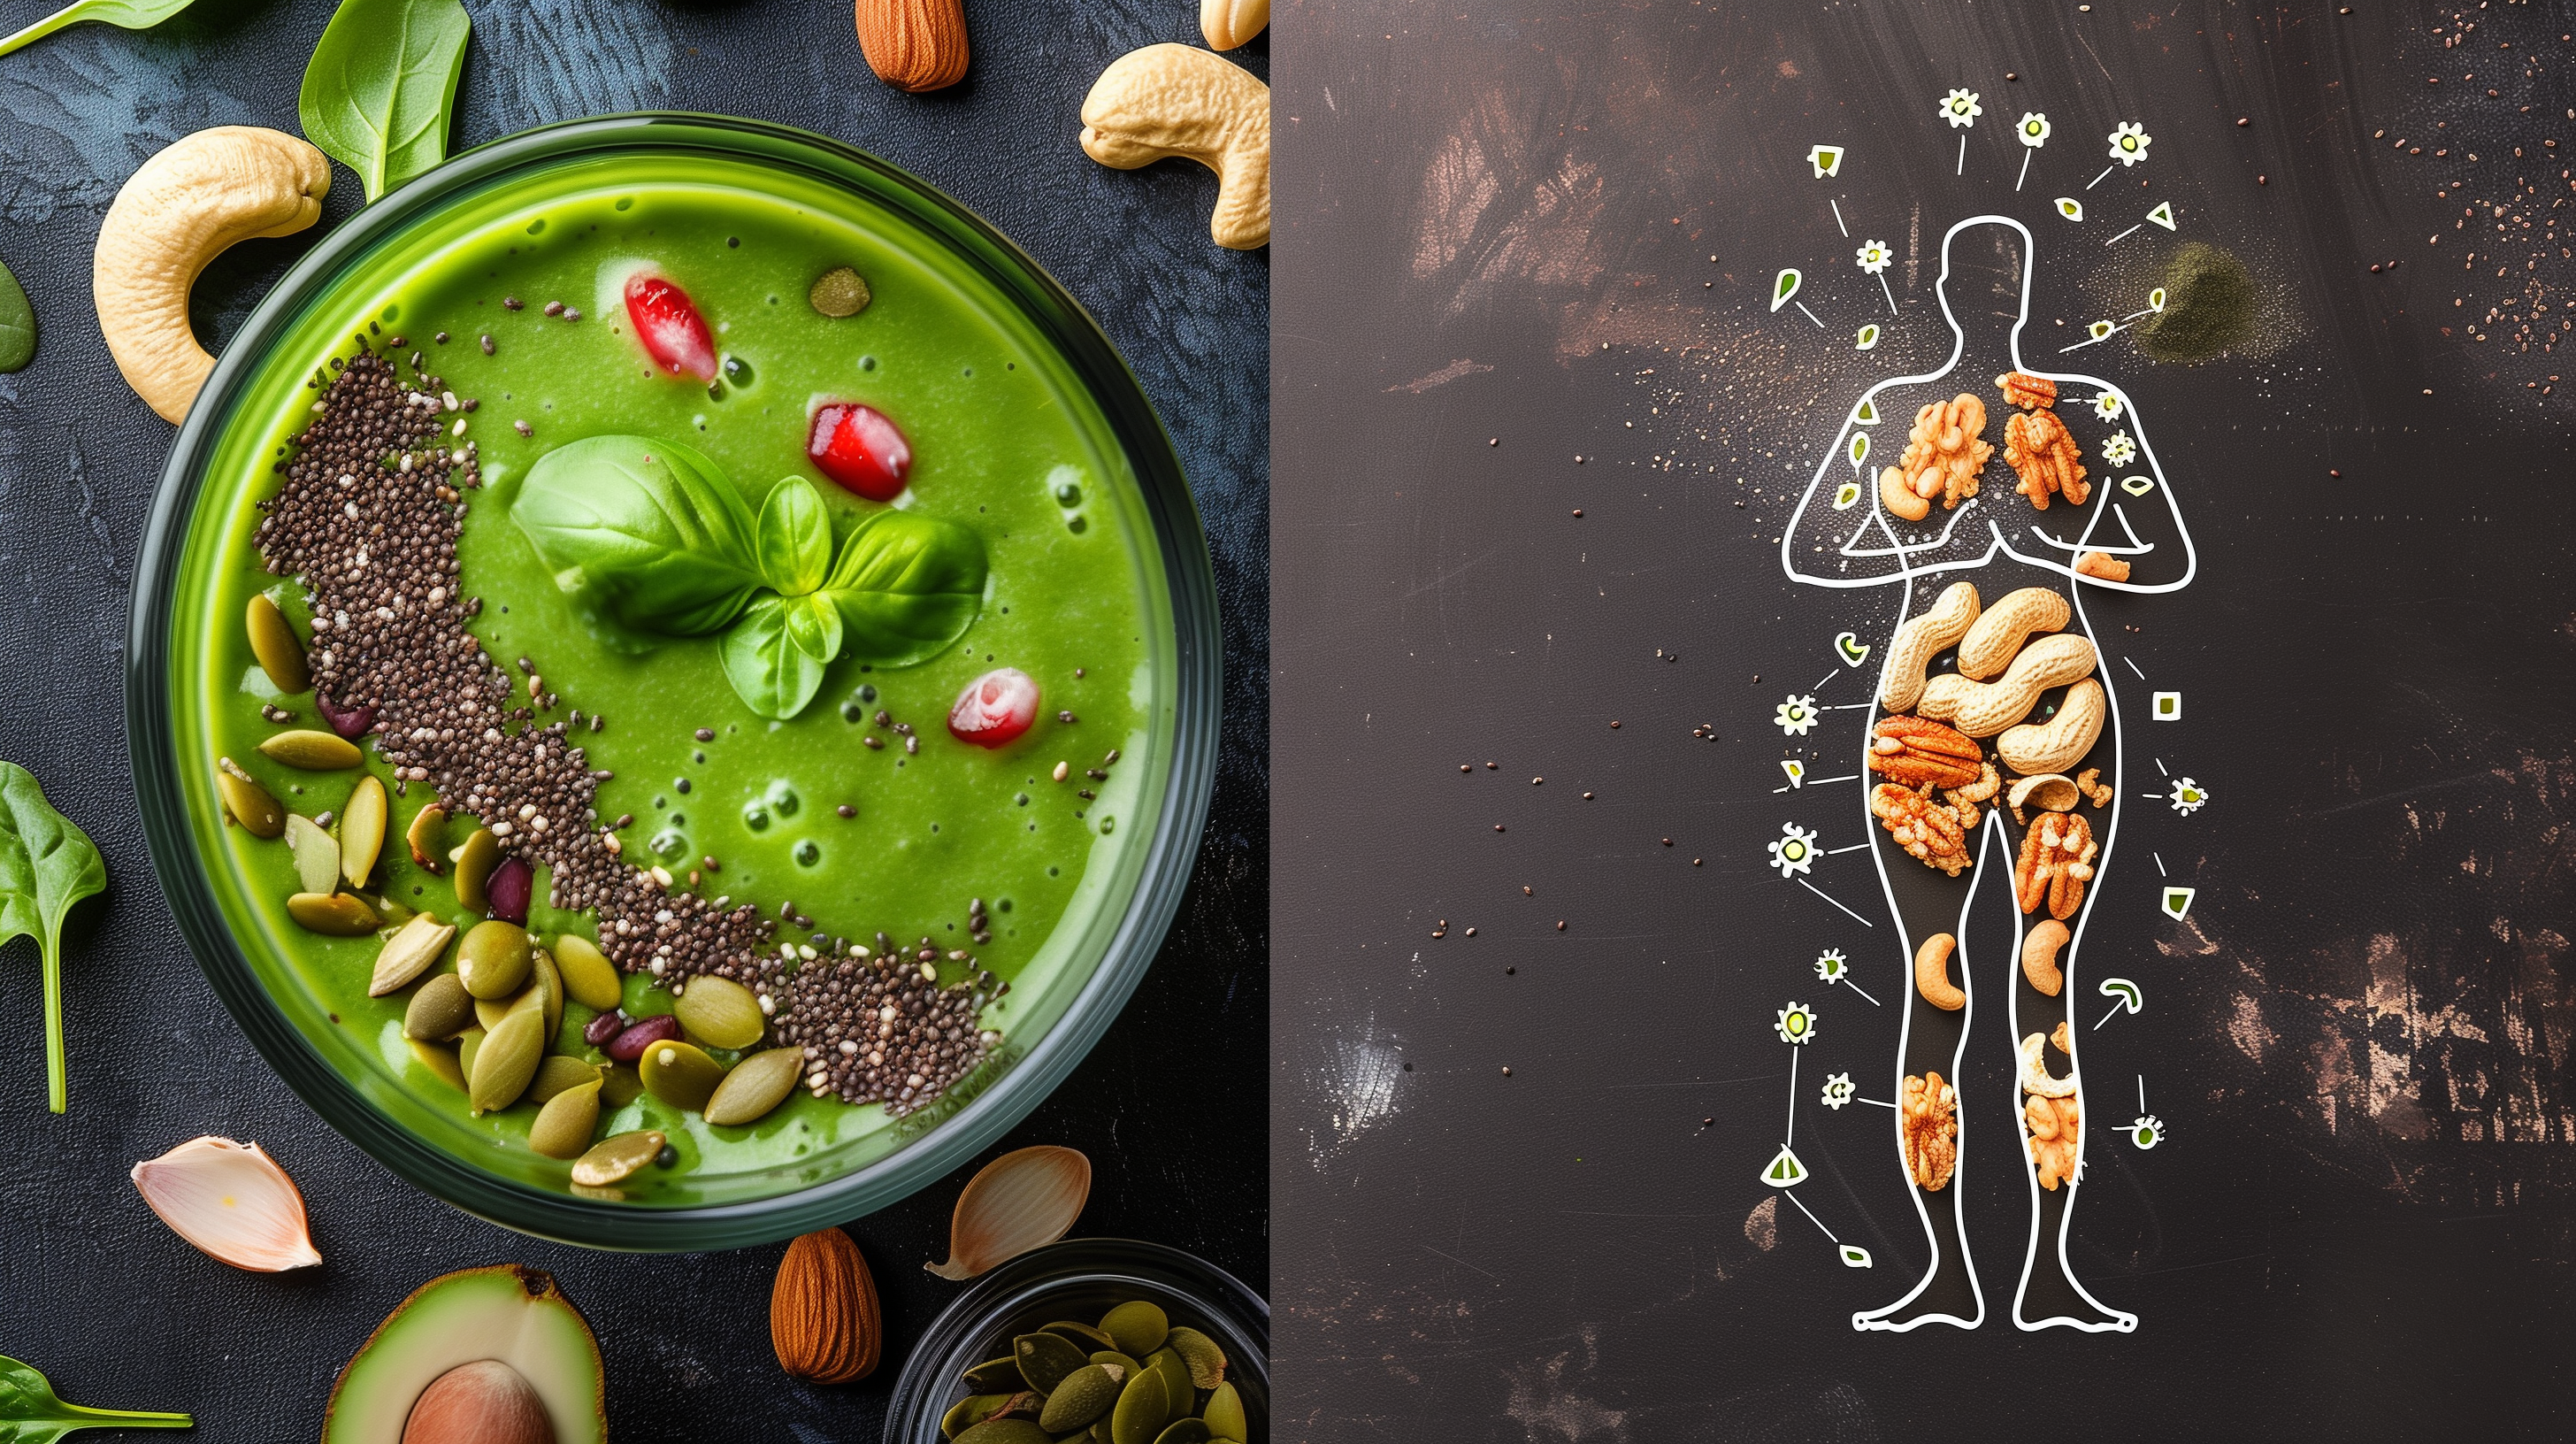 one side vibrant green smoothie with superfoods, the other side showing a distressed stomach silhouette